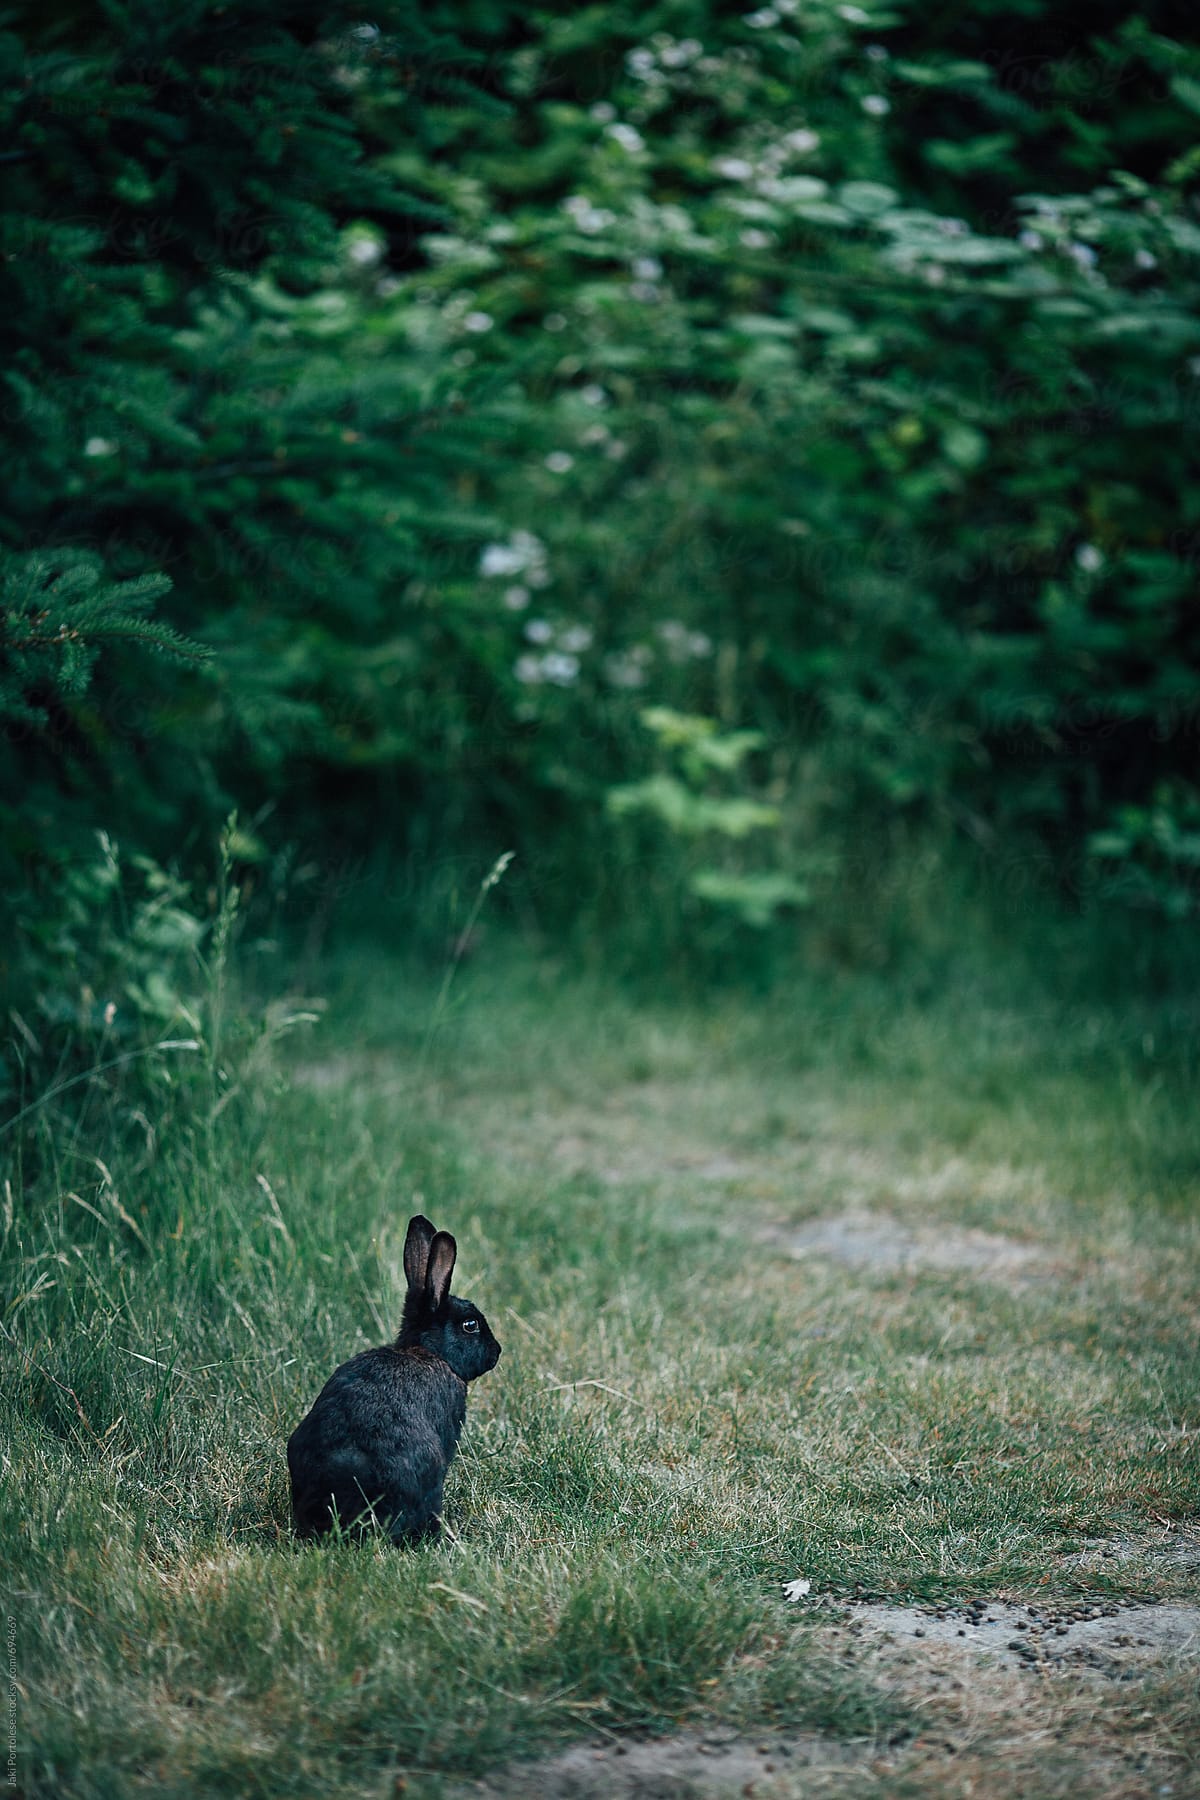 Black rabbit in the thicket